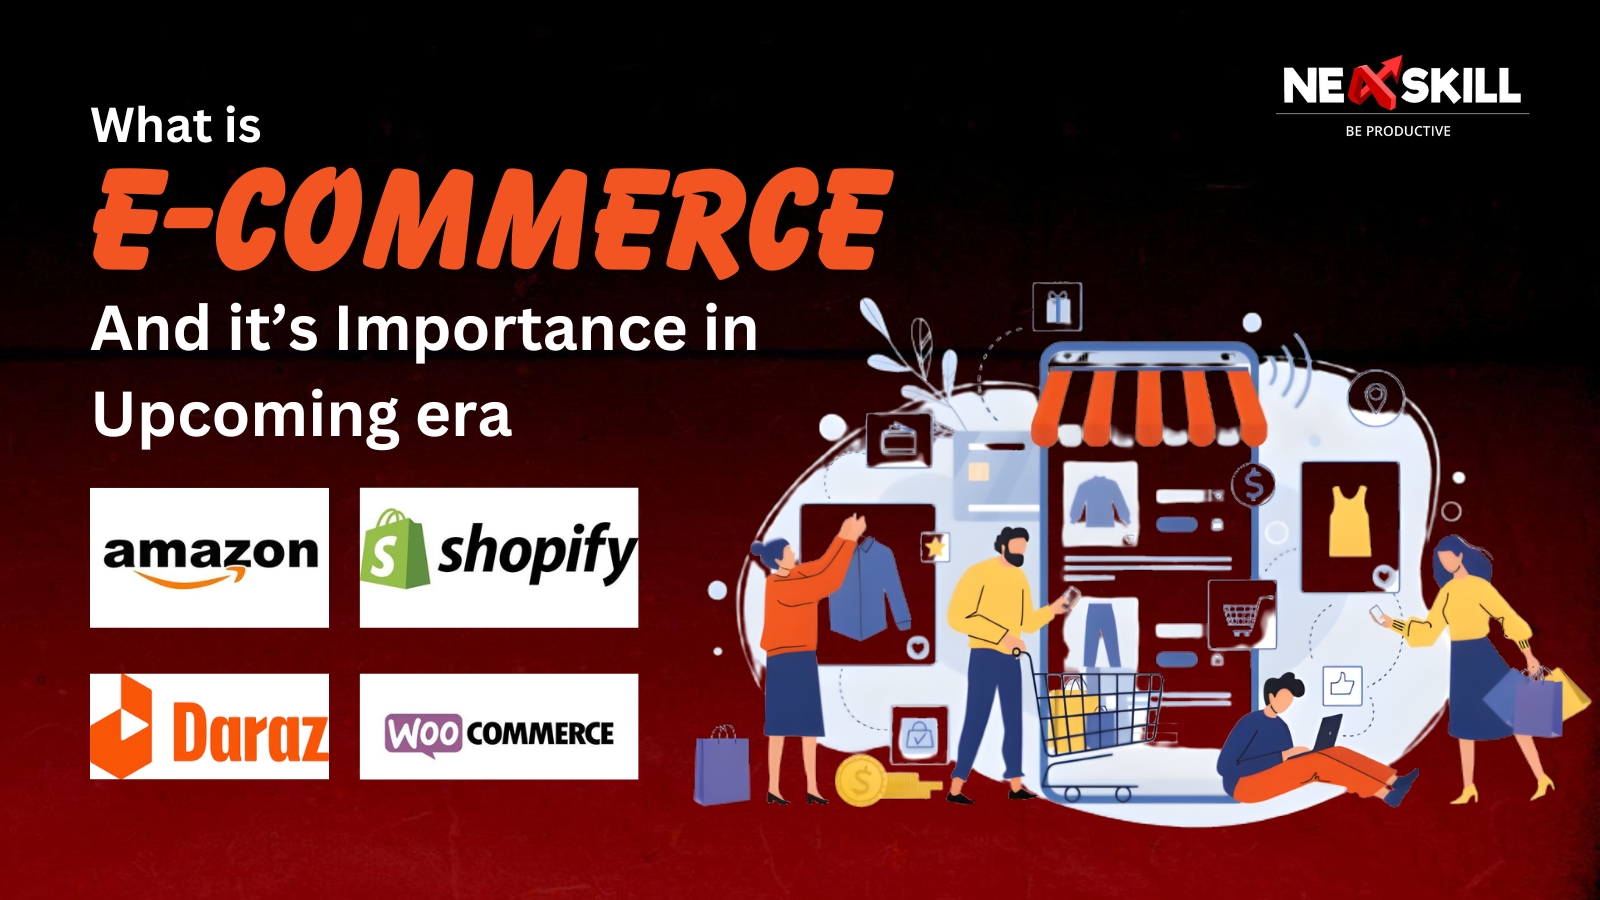 What is E-Commerce and its Importance in the upcoming era?